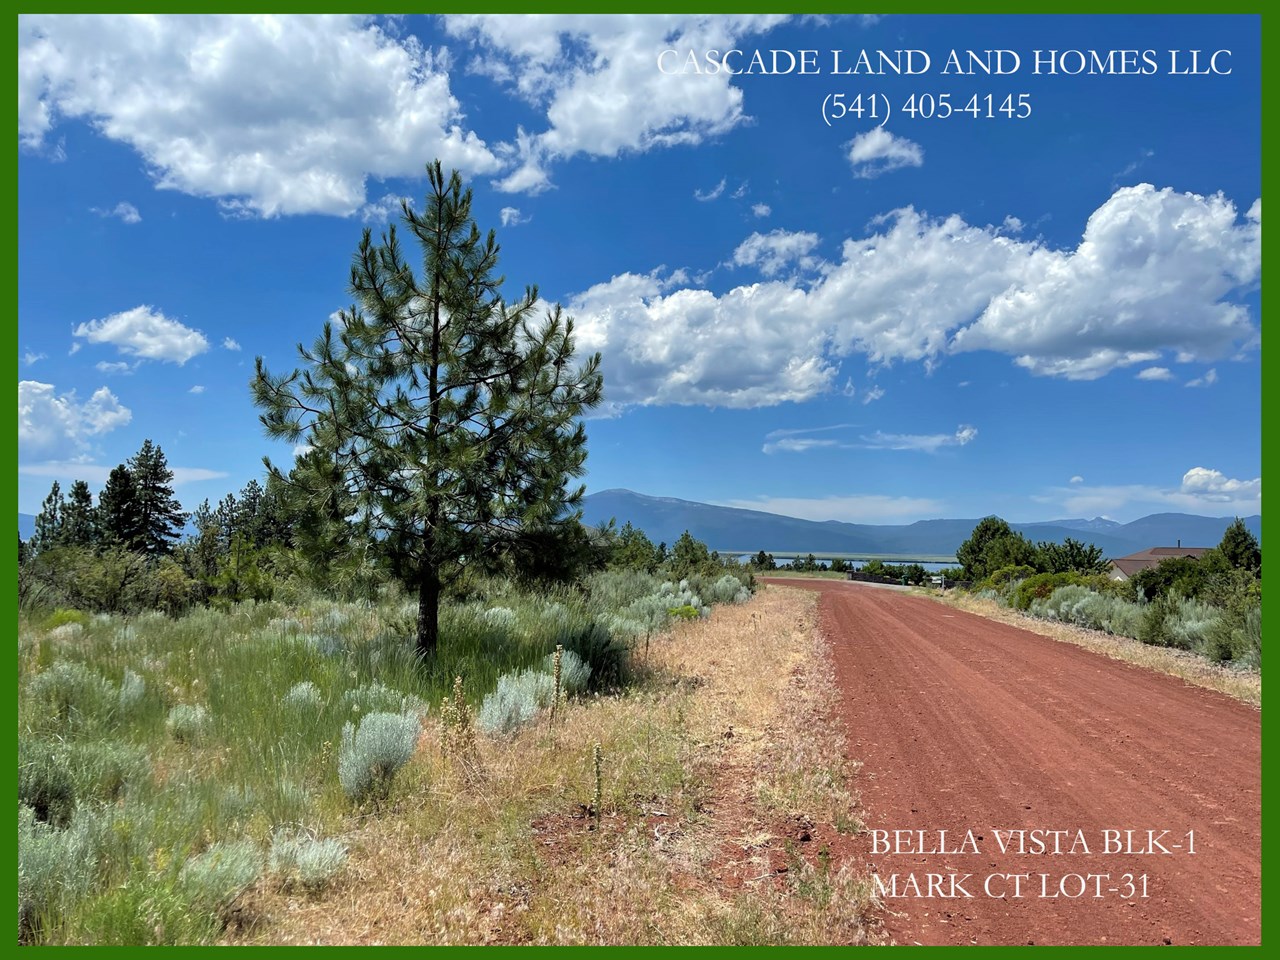 the property is mostly flat and cleared of brush, this is a prime location for your new home!